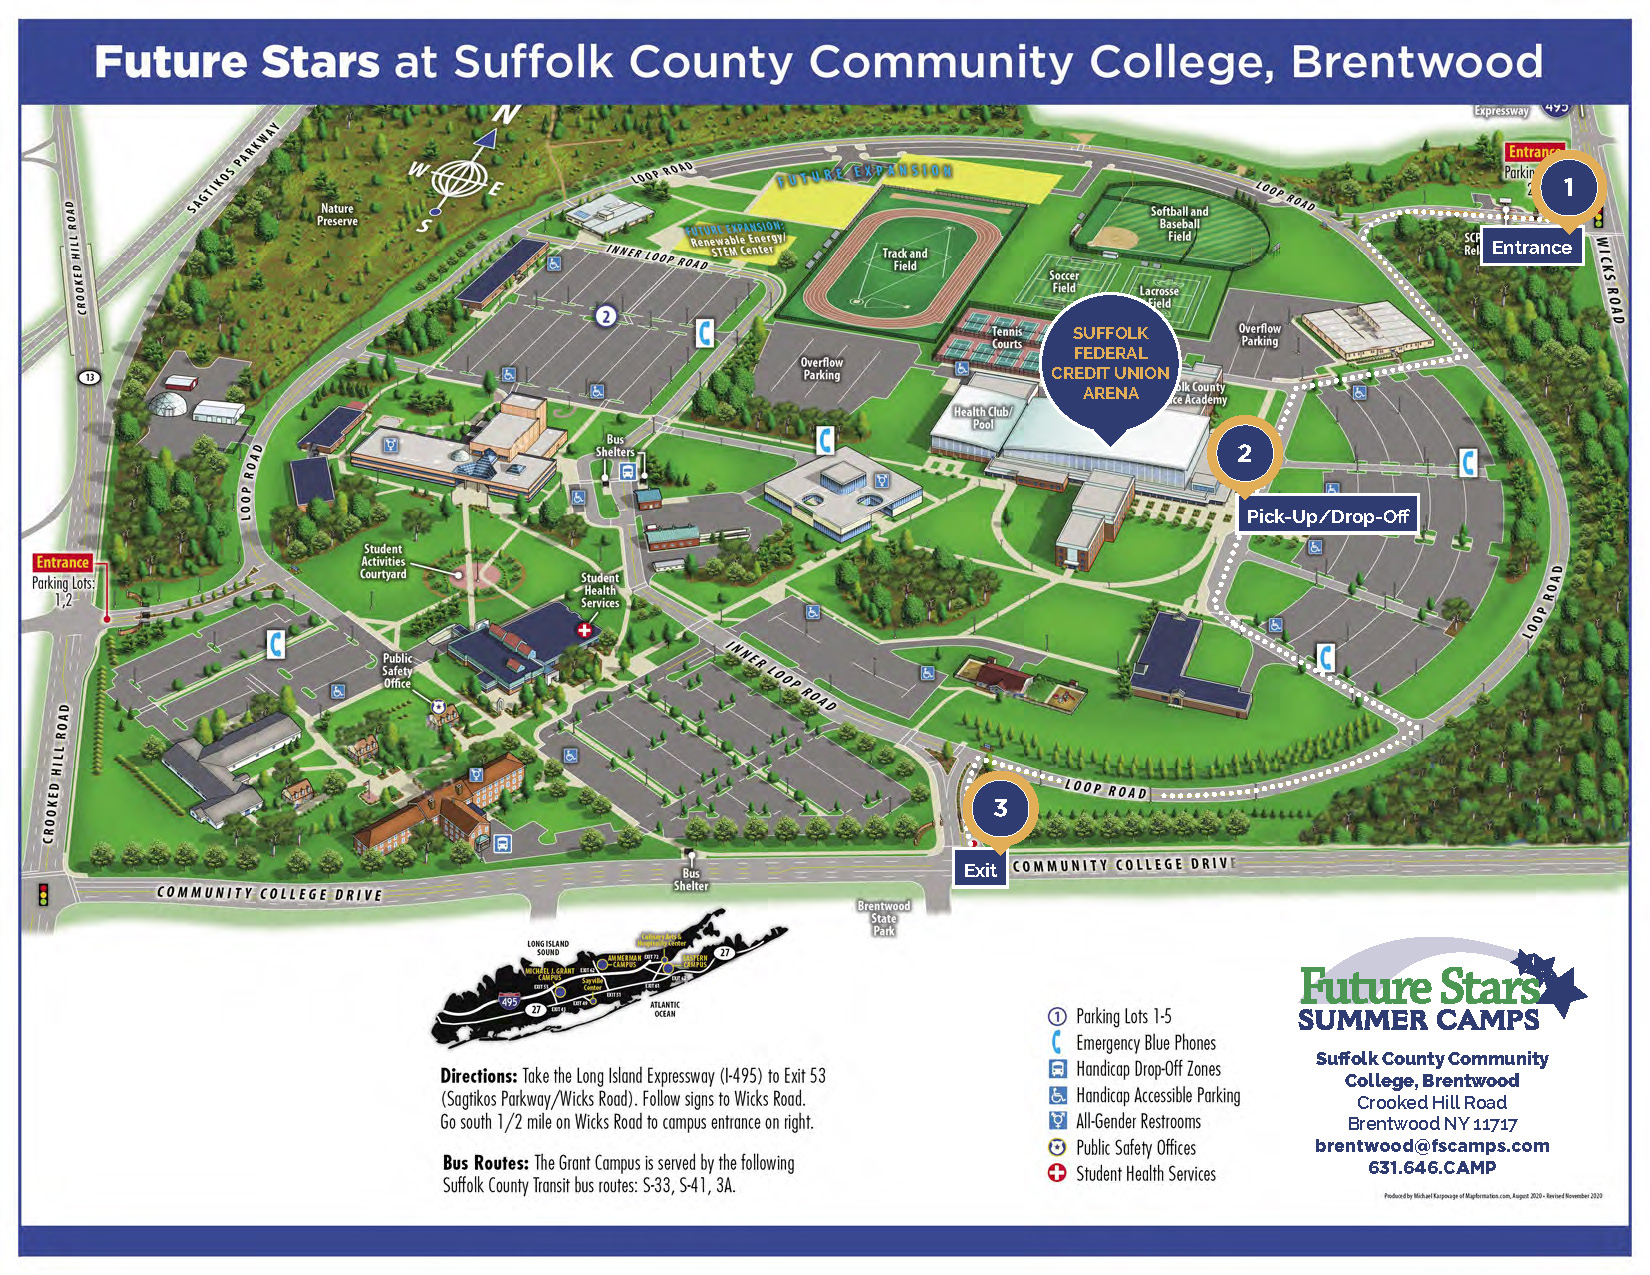 Future Stars Basketball Camp At Suffolk Community College Brentwood